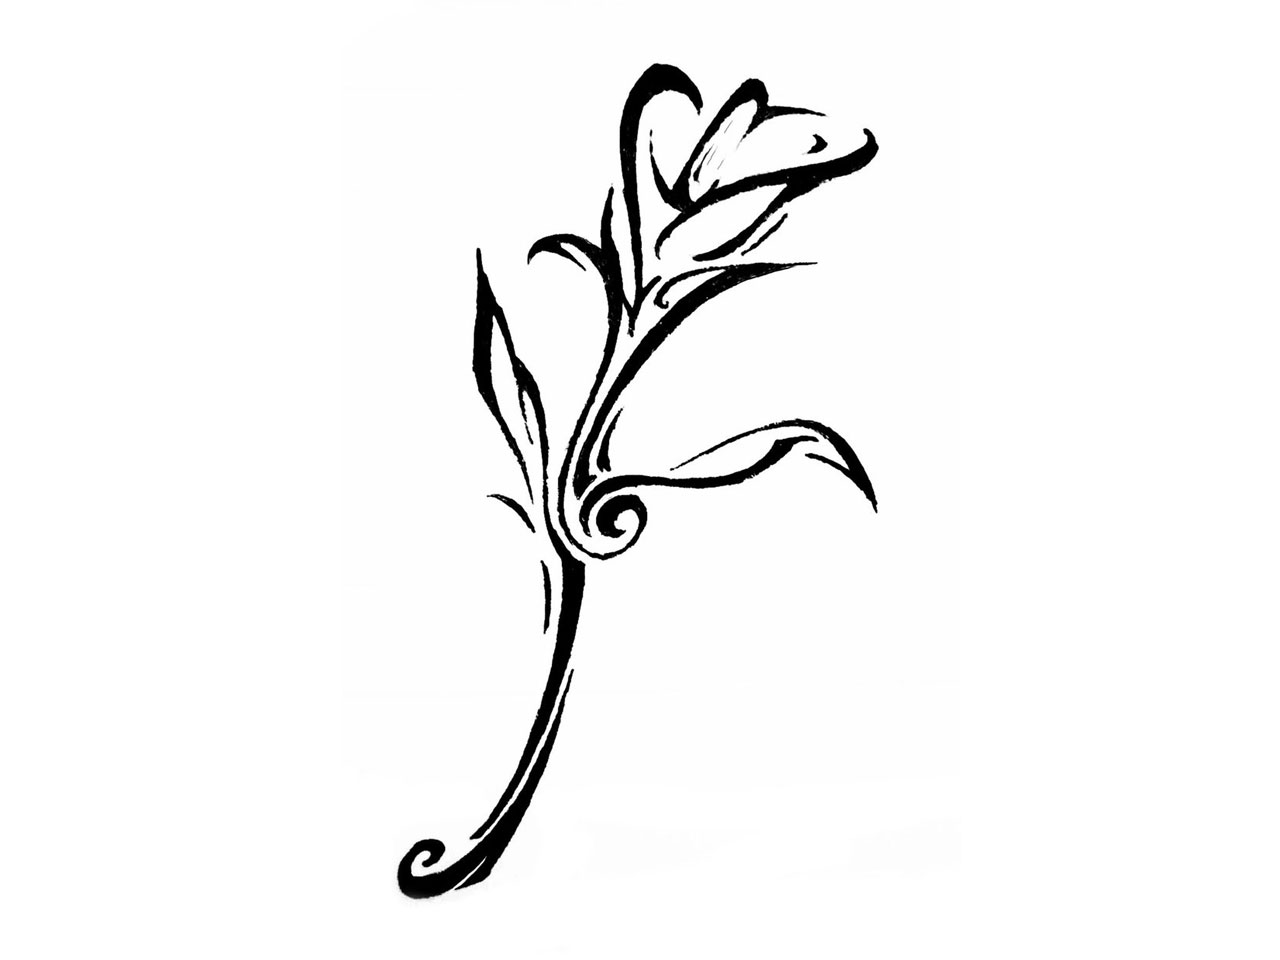 Lily of the valley tattoo ideas